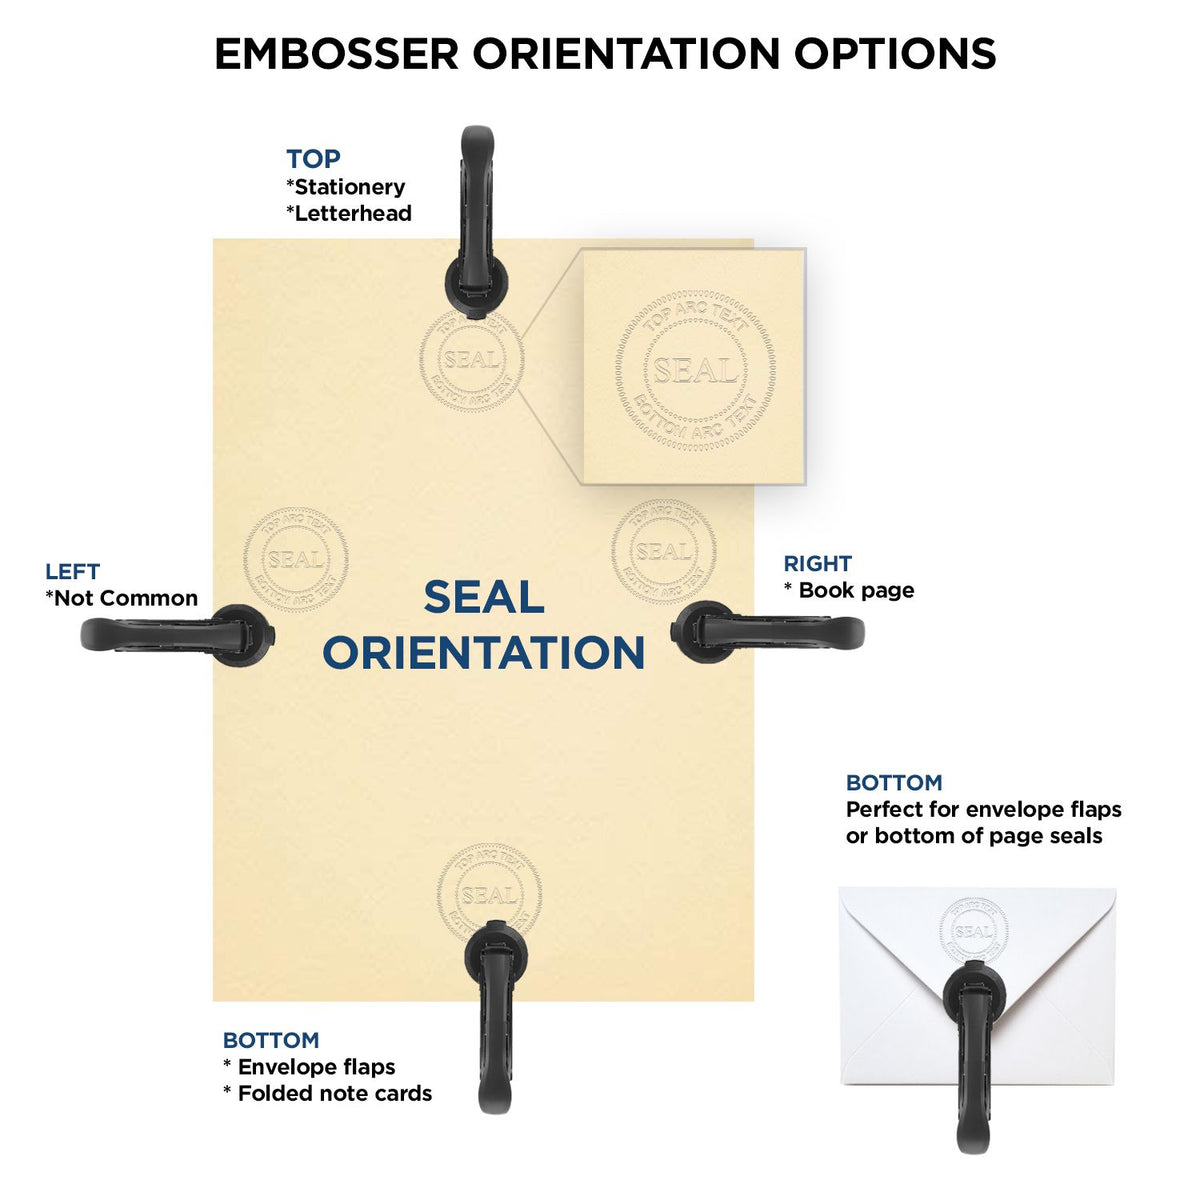 An infographic for the State of North Dakota Extended Long Reach Engineer Seal showing embosser orientation, this is showing examples of a top, bottom, right and left insert.